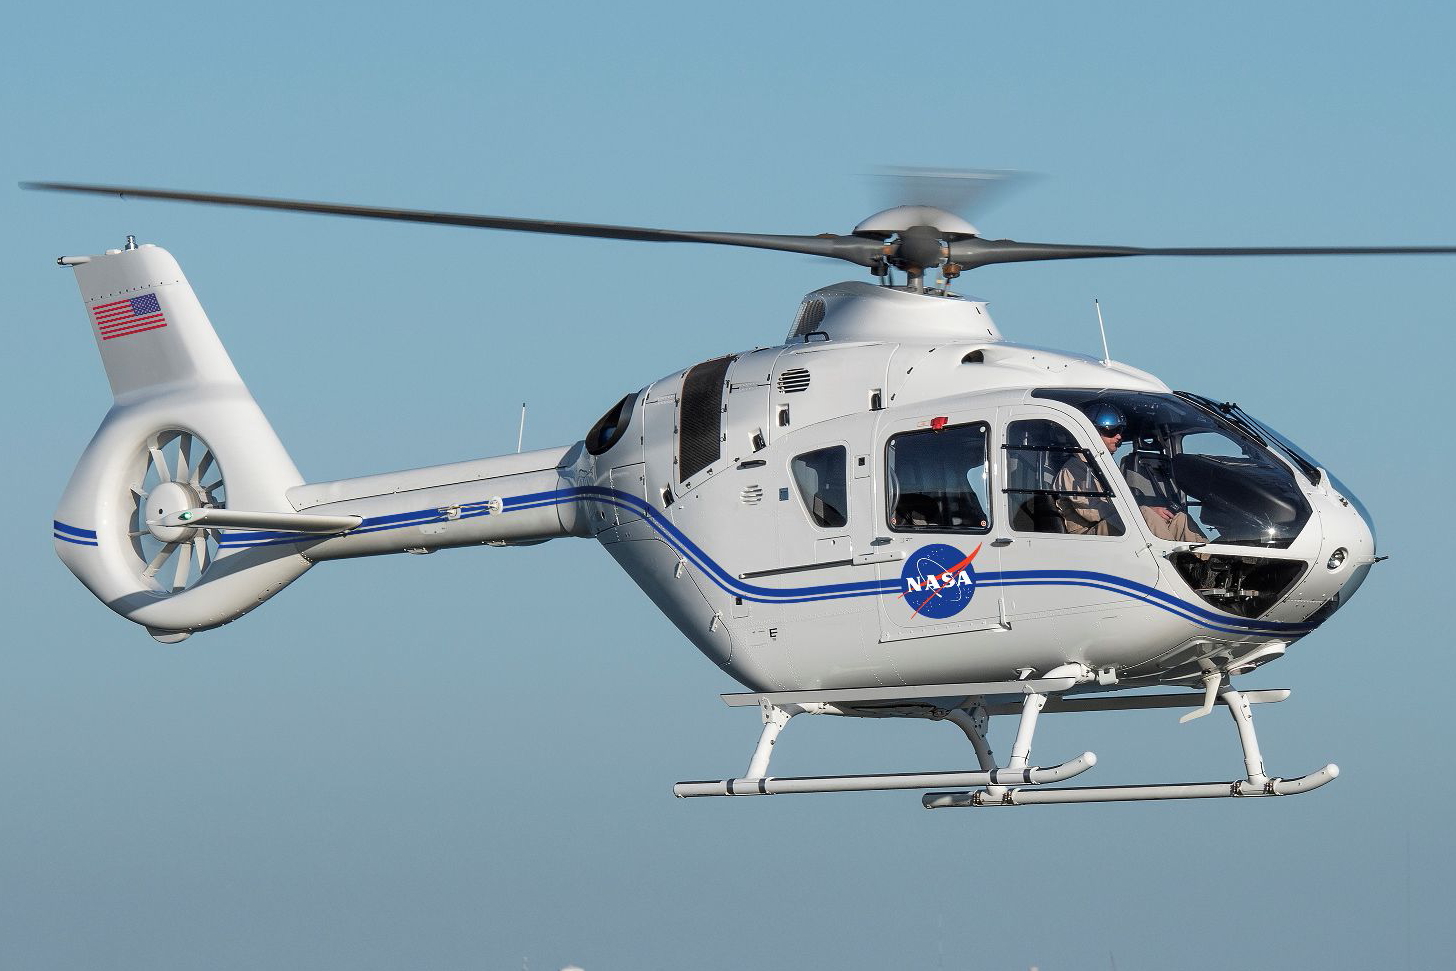 NASA has signed a $15 million HCare Infinite full-availability support solution with Airbus Helicopters. The contract, initially covering two years with the option to extend for up to ten, provides the entire spectrum of support needs for NASA’s fleet of three H135 helicopters, which will begin deliveries later this month. Click to enlarge.